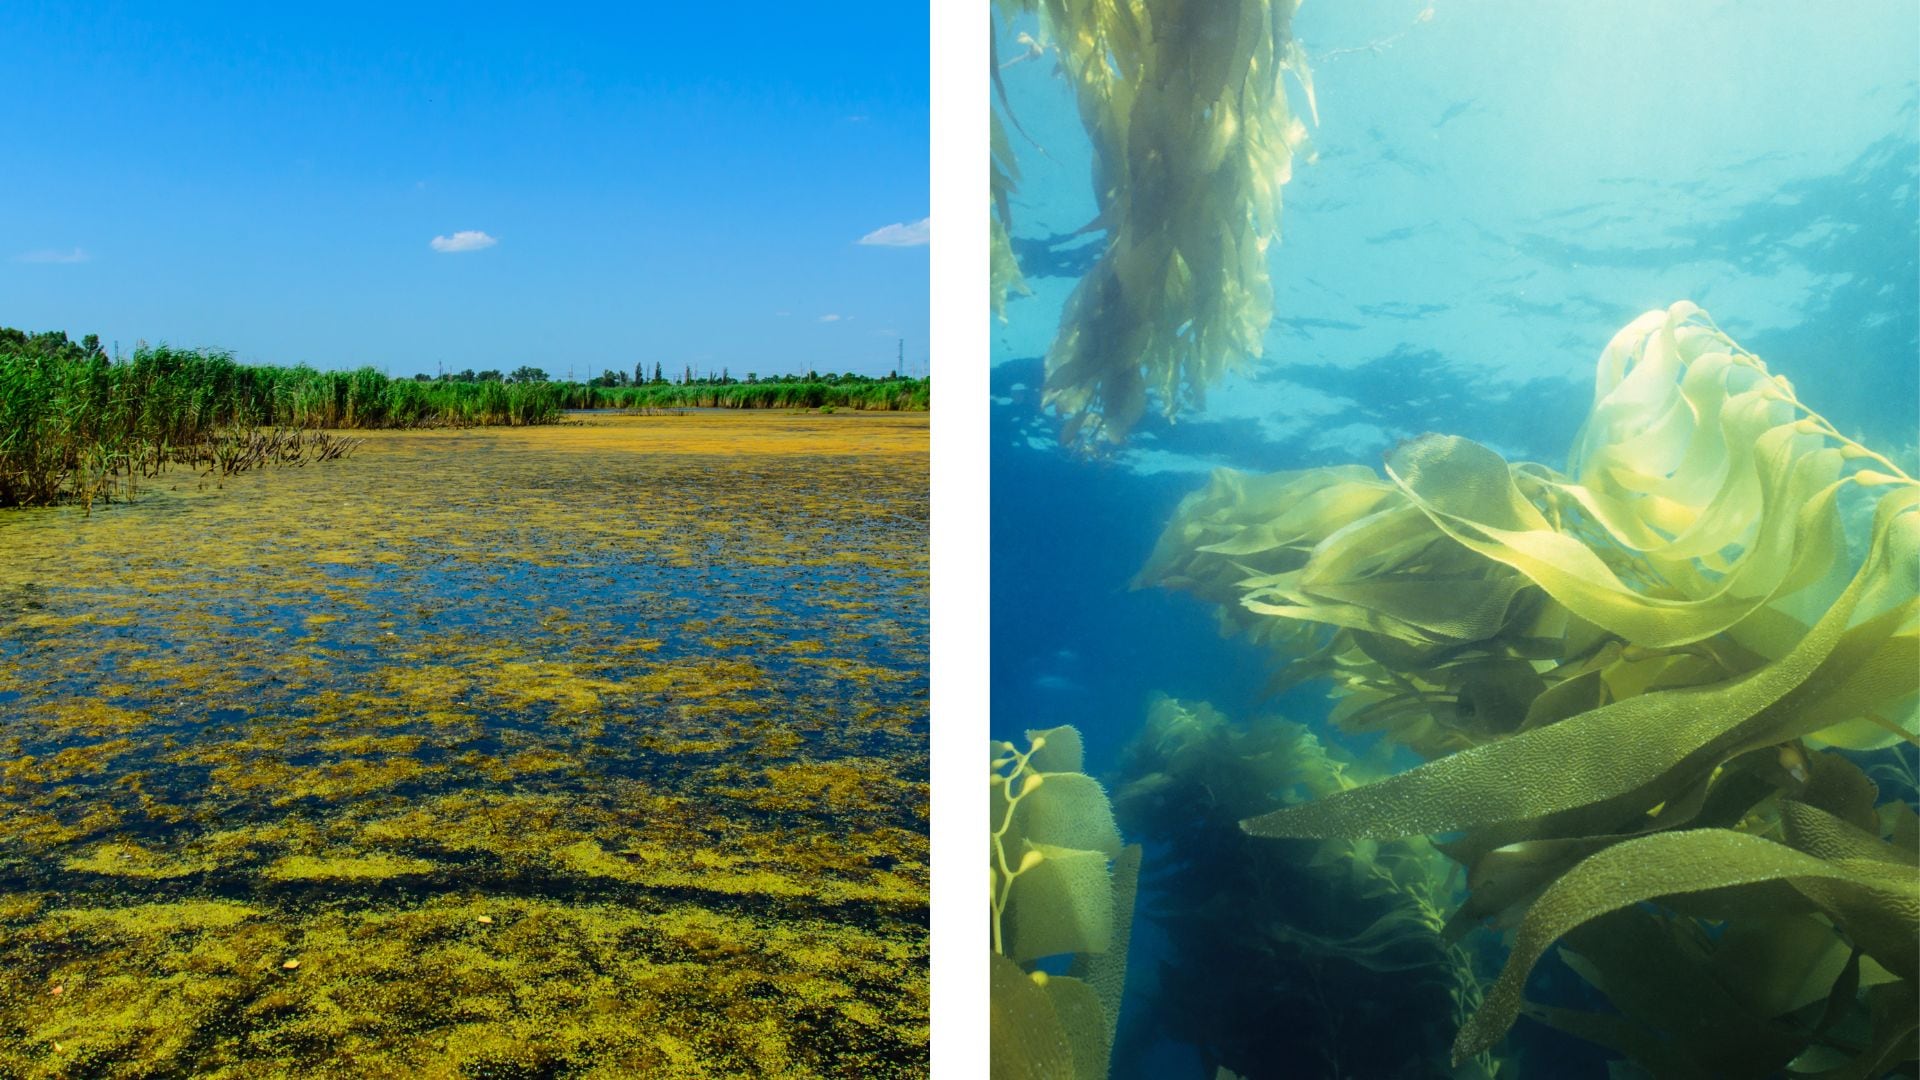 Side-by-side photos showing water covered in small algae on the left and an underwater view of large seaweed plants on the right